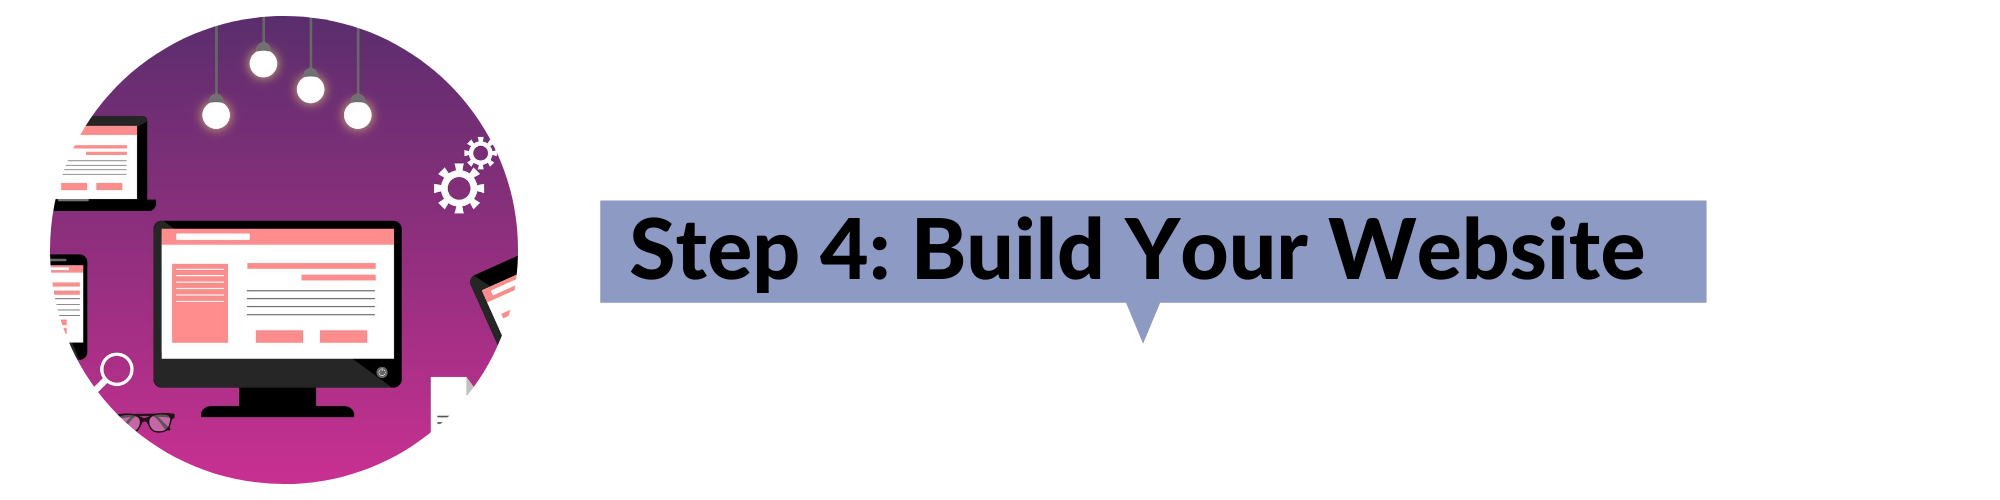 Step Four Build Your Website with a computer image